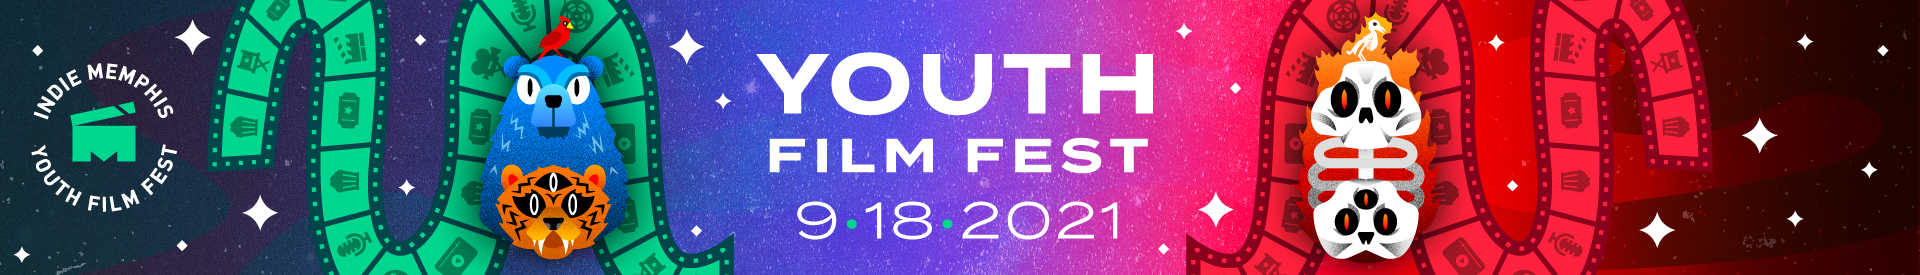 Indie Memphis Youth Film Fest 2021